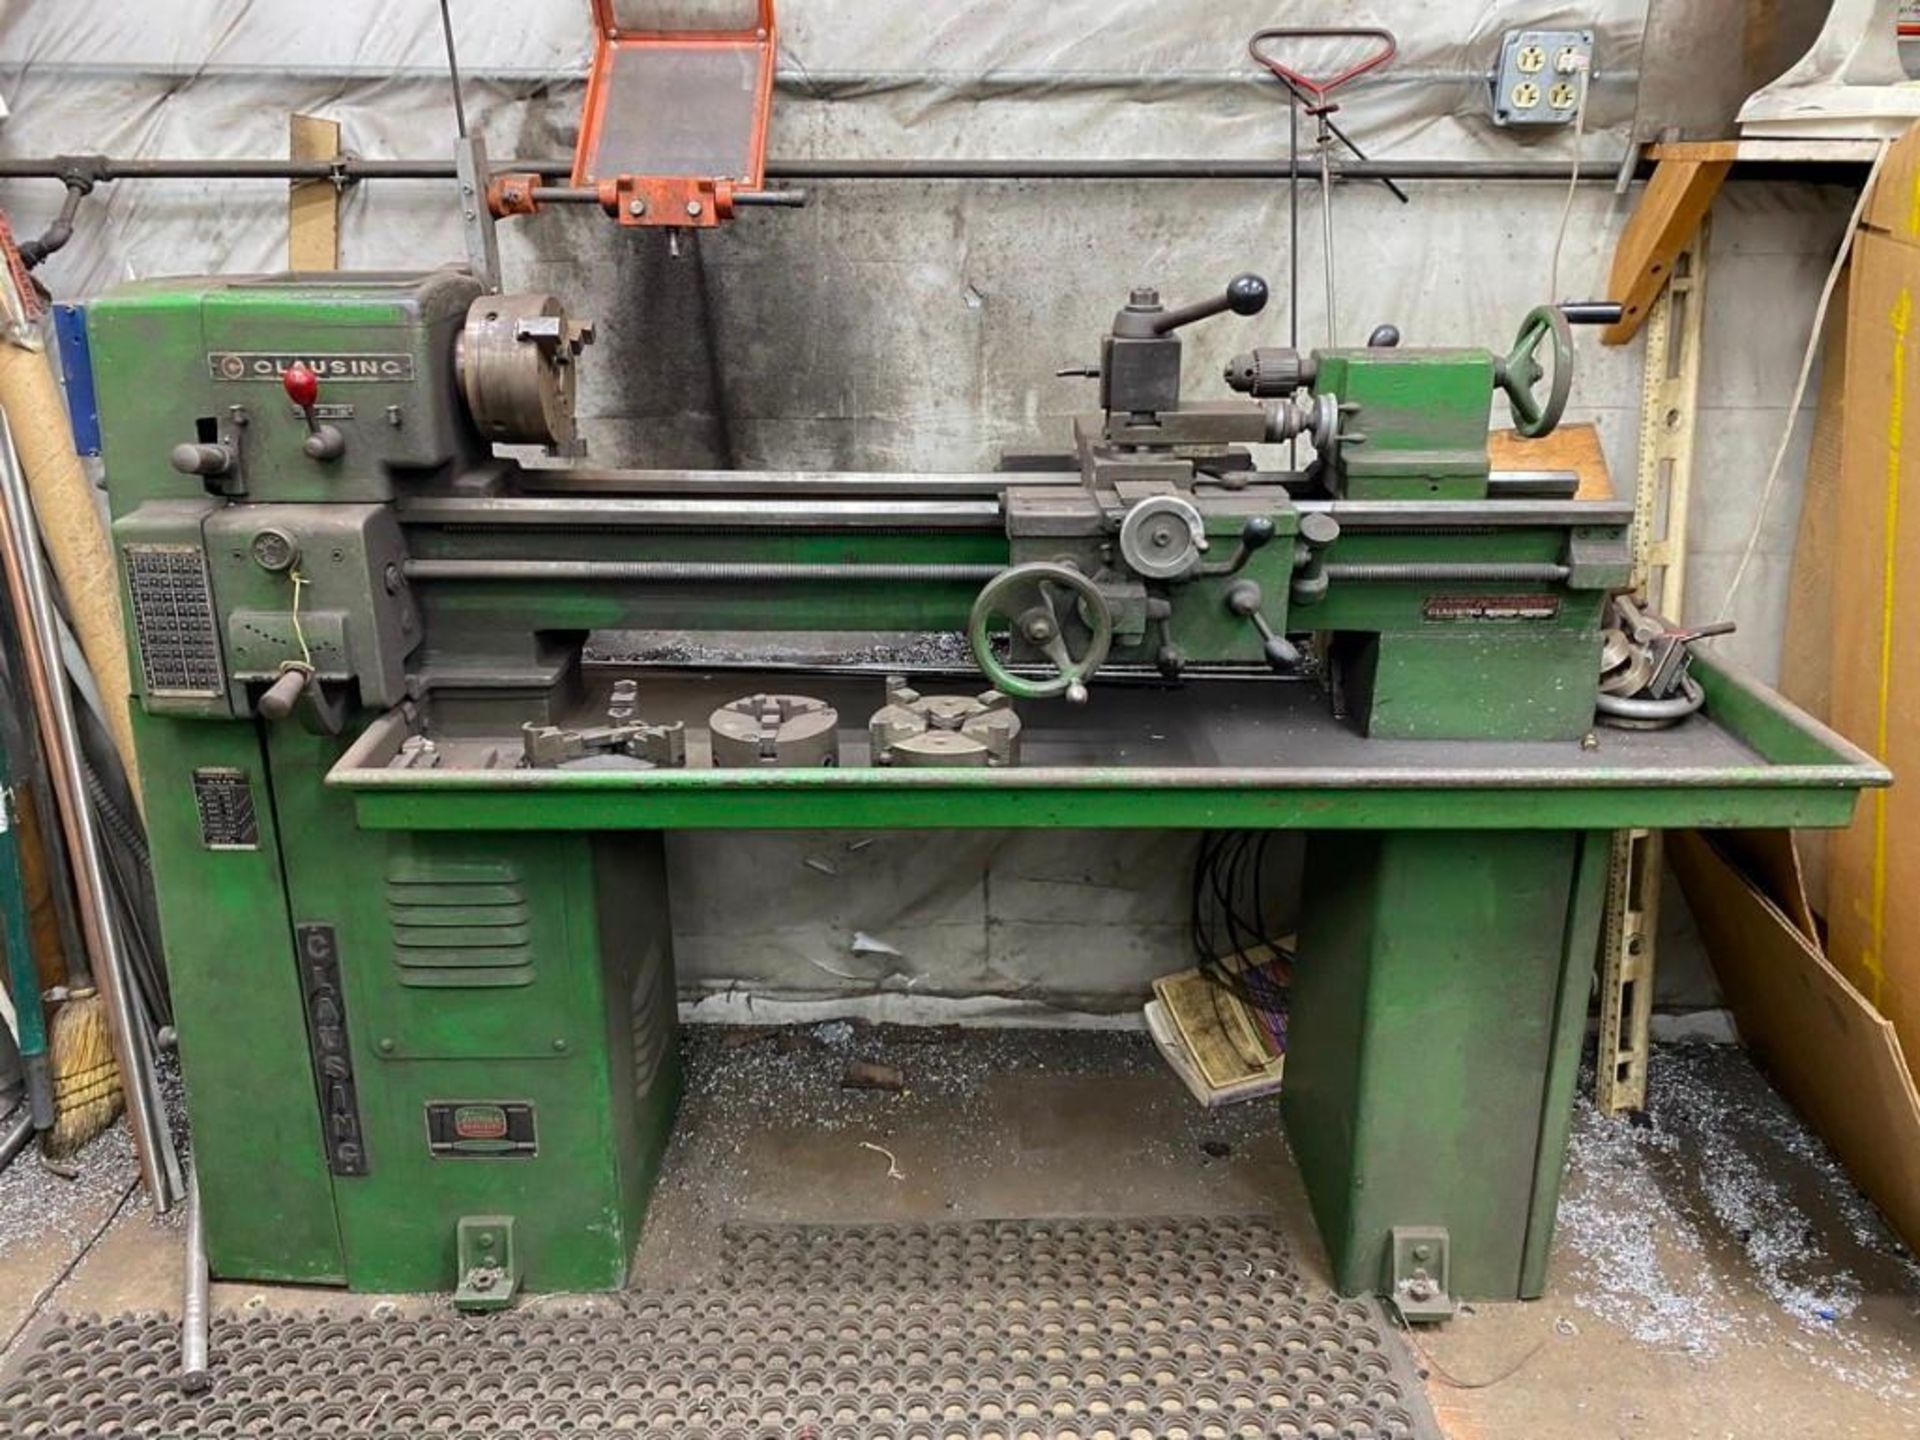 Clausing Bed Engine Lathe, Model 4914, 10'' Swing 36"